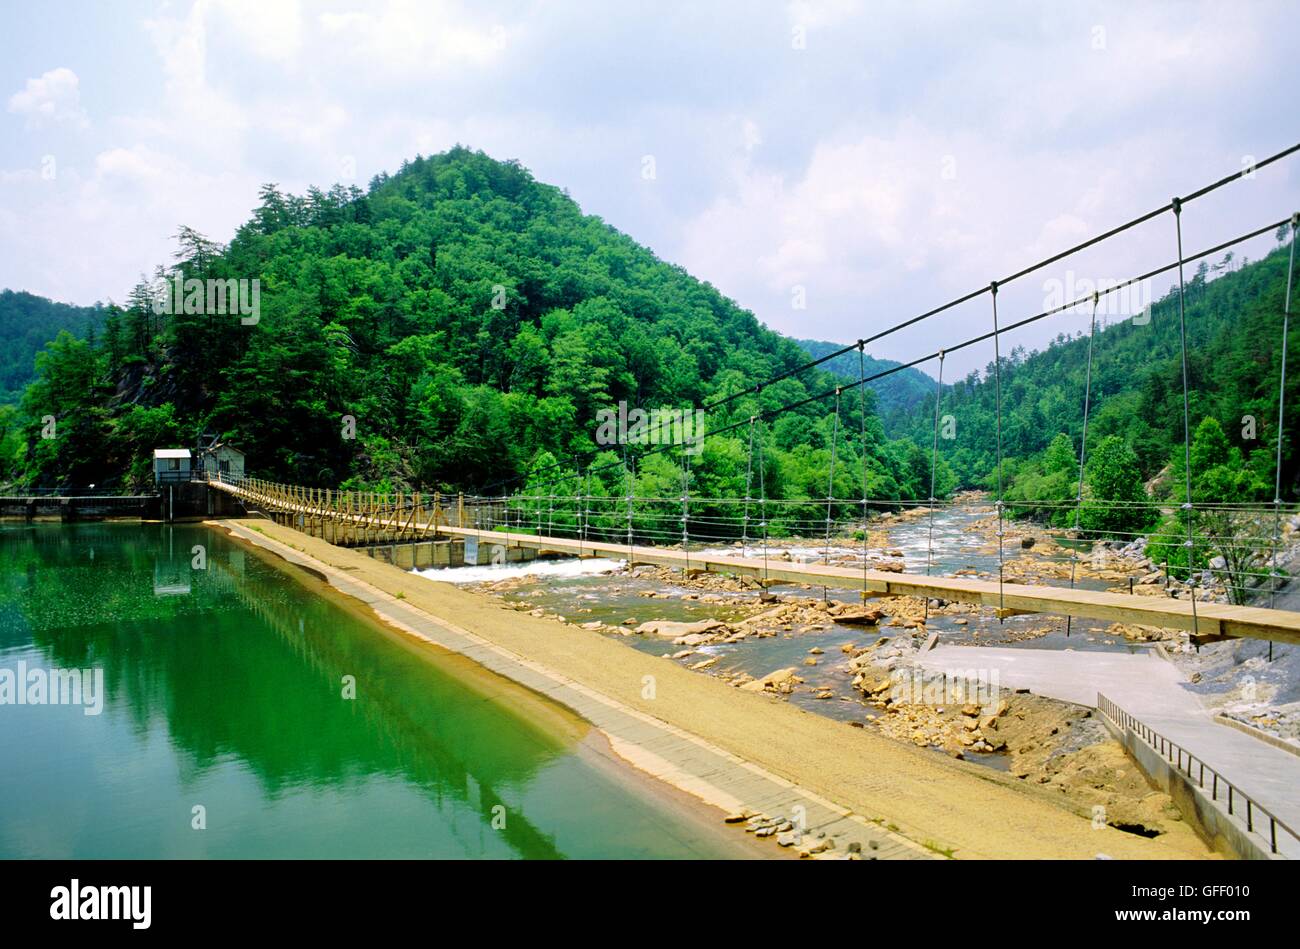 Part of the Tennessee Valley Authority river hydro energy system near Ducktown, Tennessee, USA. Dam on Lake Ocoee Stock Photo